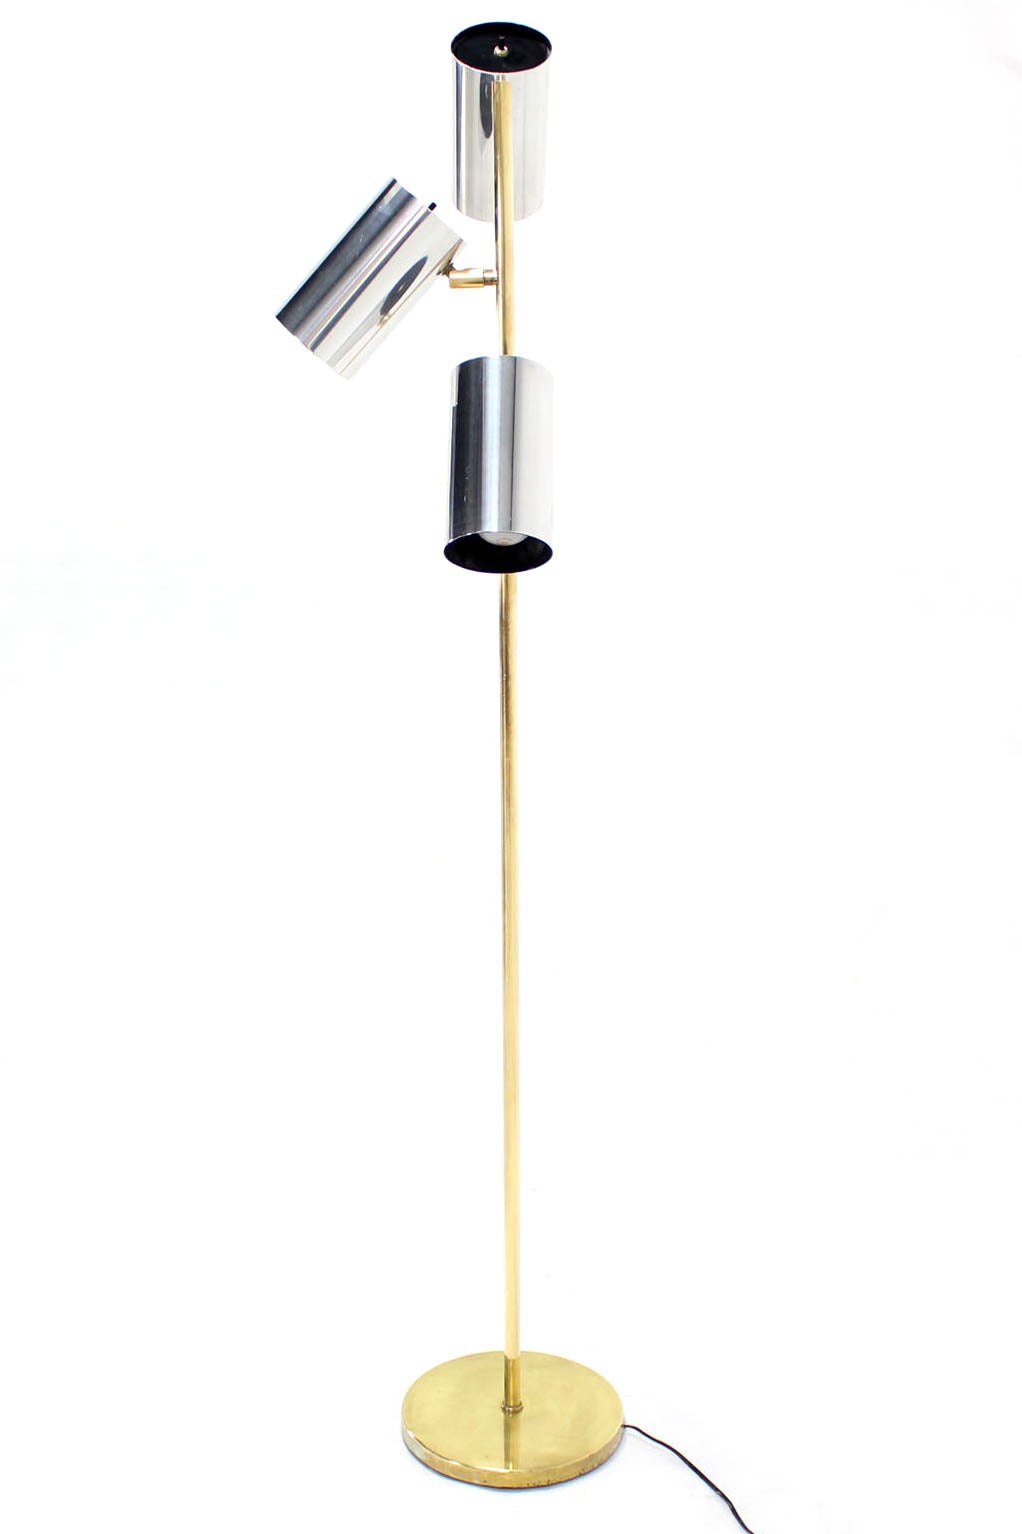 American Midcentury Brass Base Floor Lamp with Three Fully Adjustable Chrome Shades